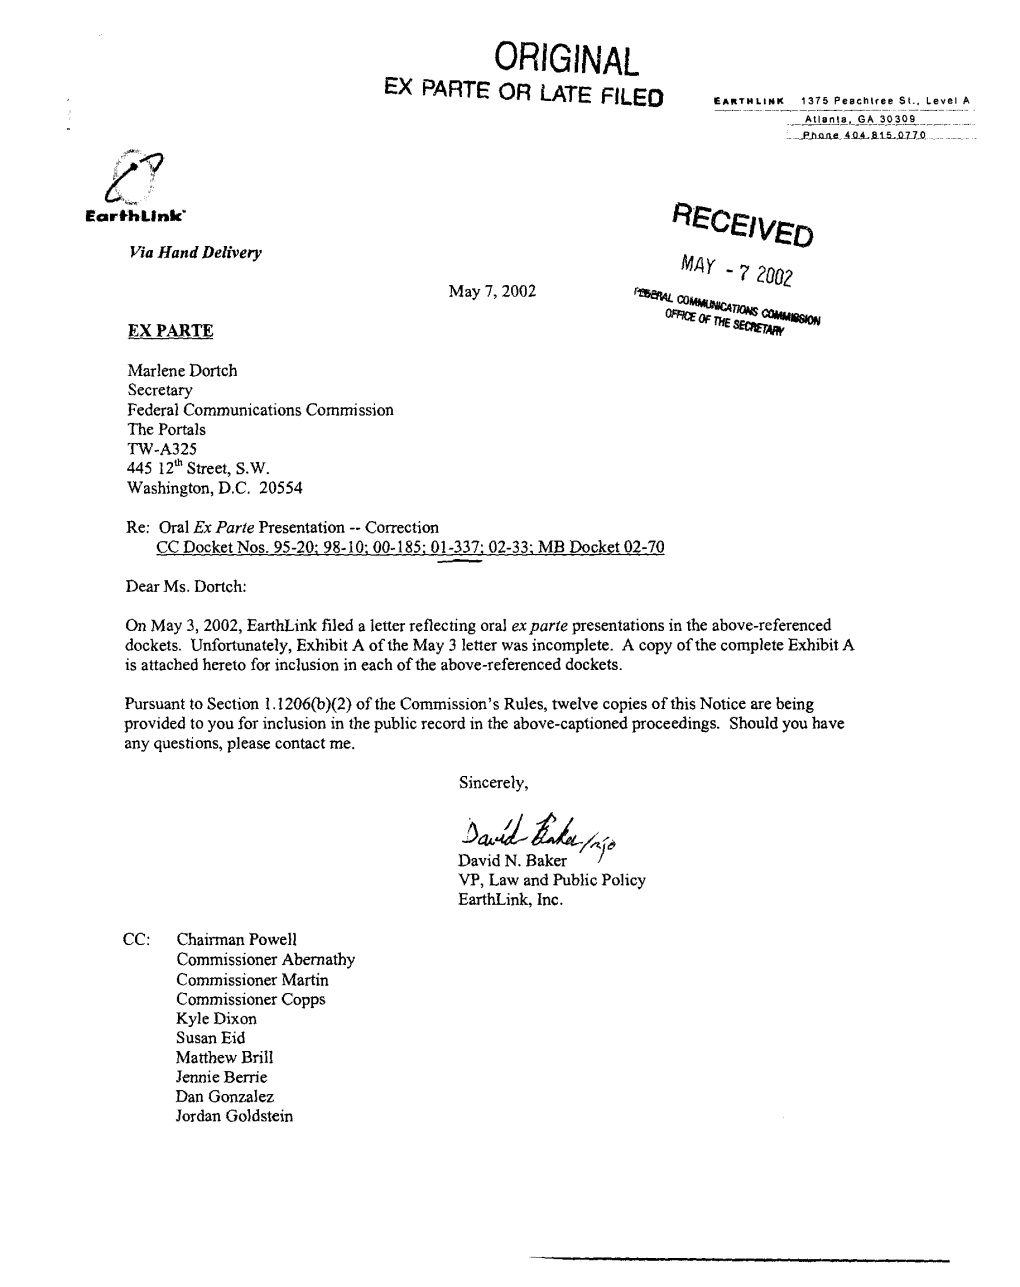 Earthlink Filed a Letter Reflecting Oral Ex Parte Presentations in the Above-Referenced Dockets